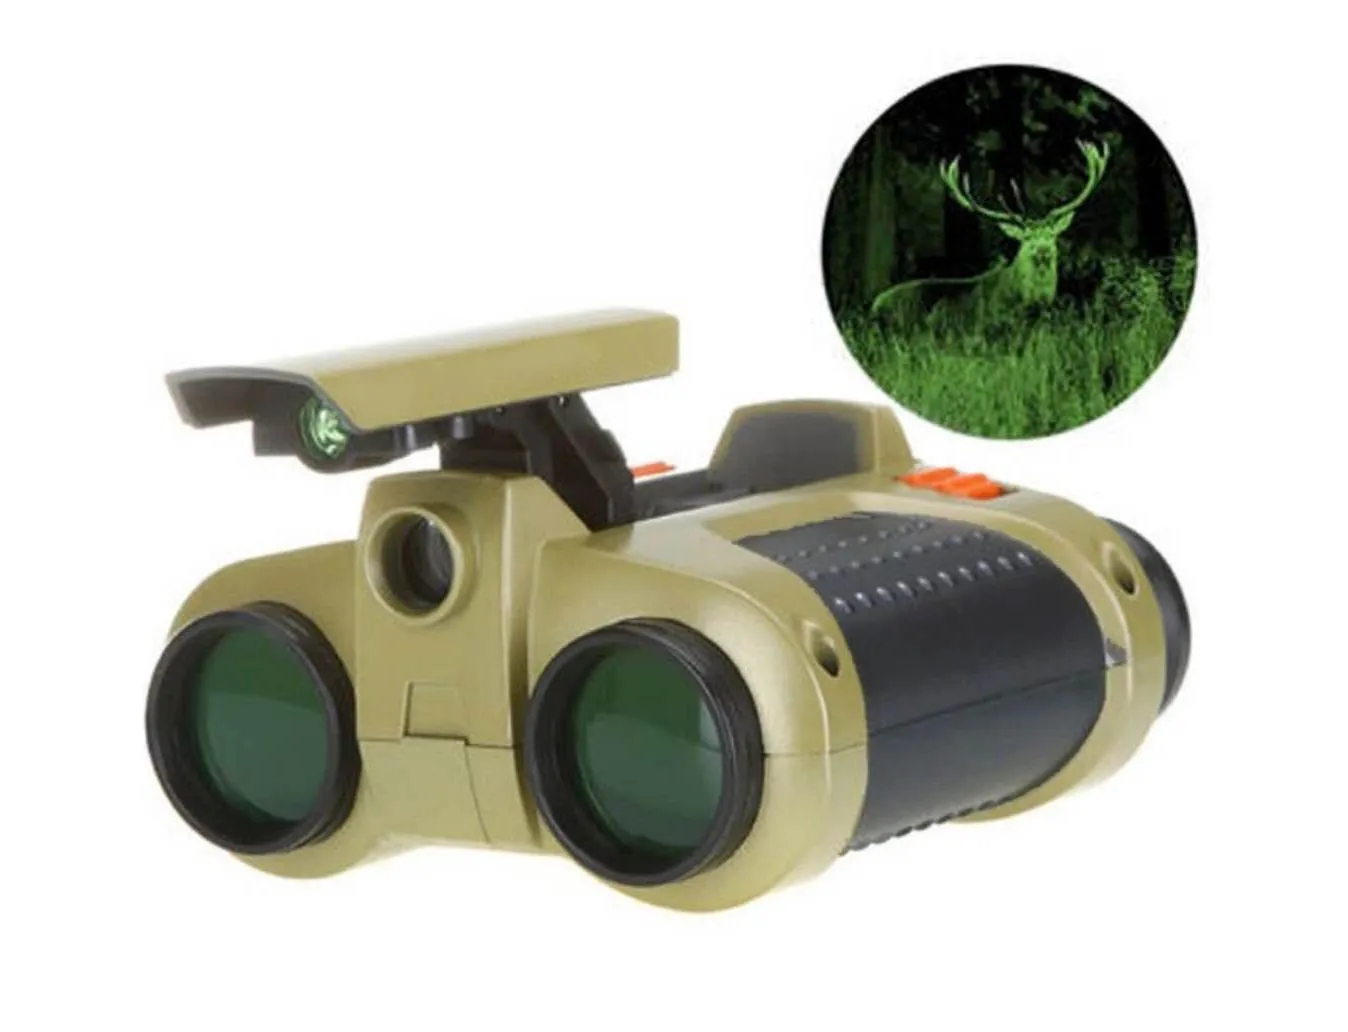 2018 Hot Sale 4x30 Binocular Telescope Night Vision Novelty kids toys Pop-up Light Night for Vision Scope Christmas Gifts